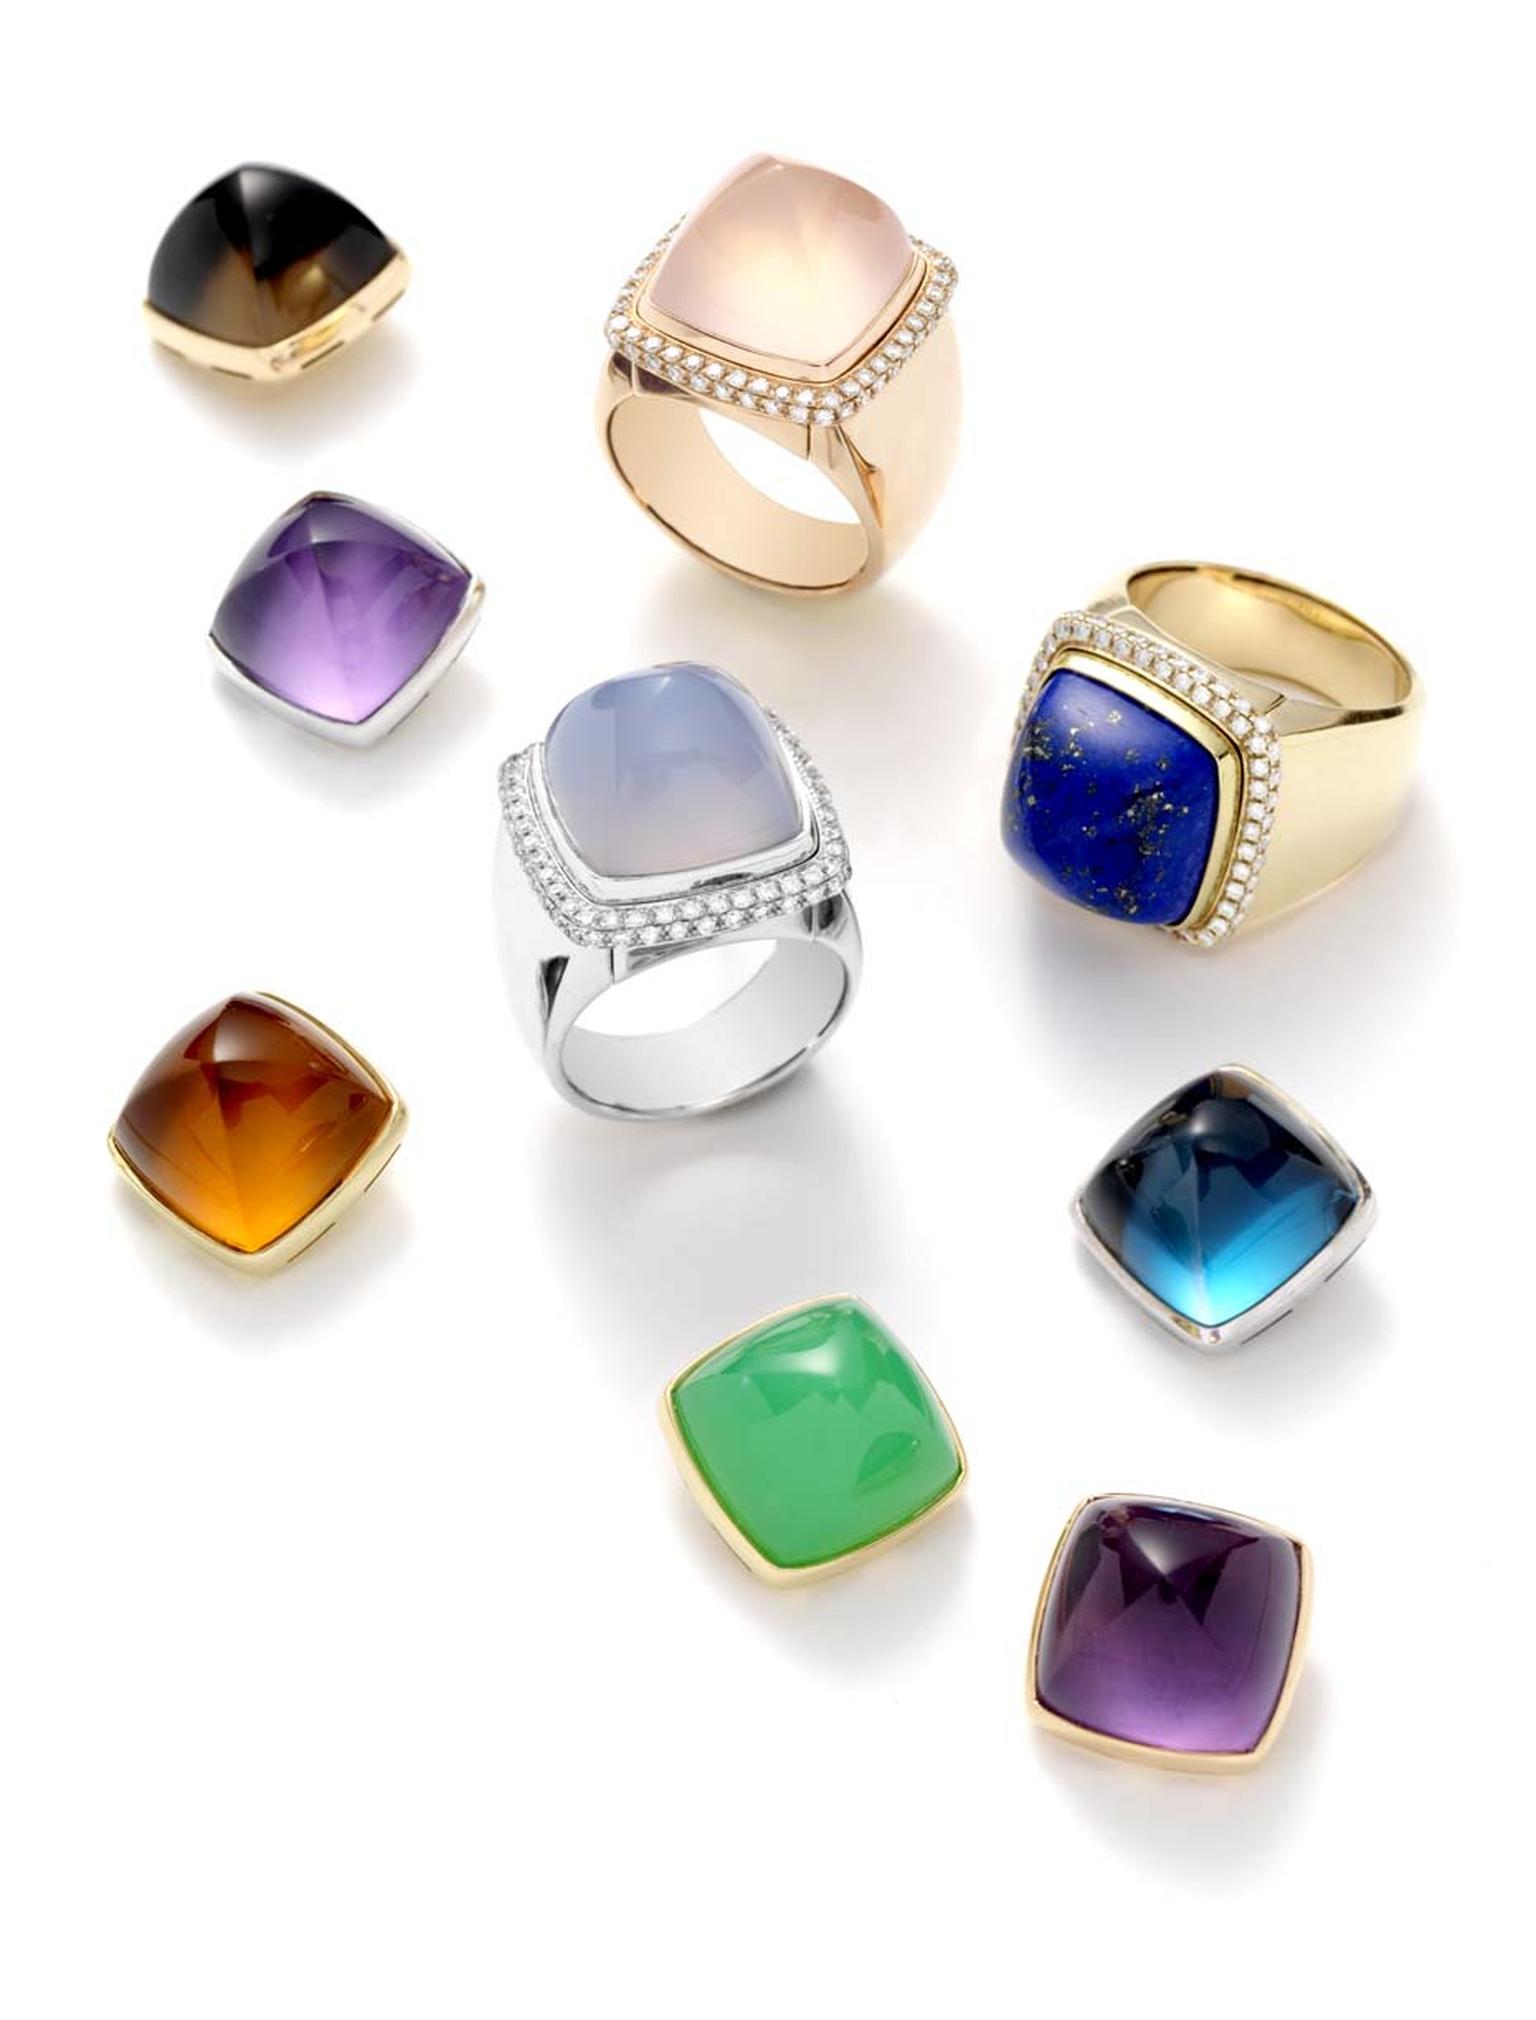 Fred Paris jewellery: switch your gemstone depending on your mood